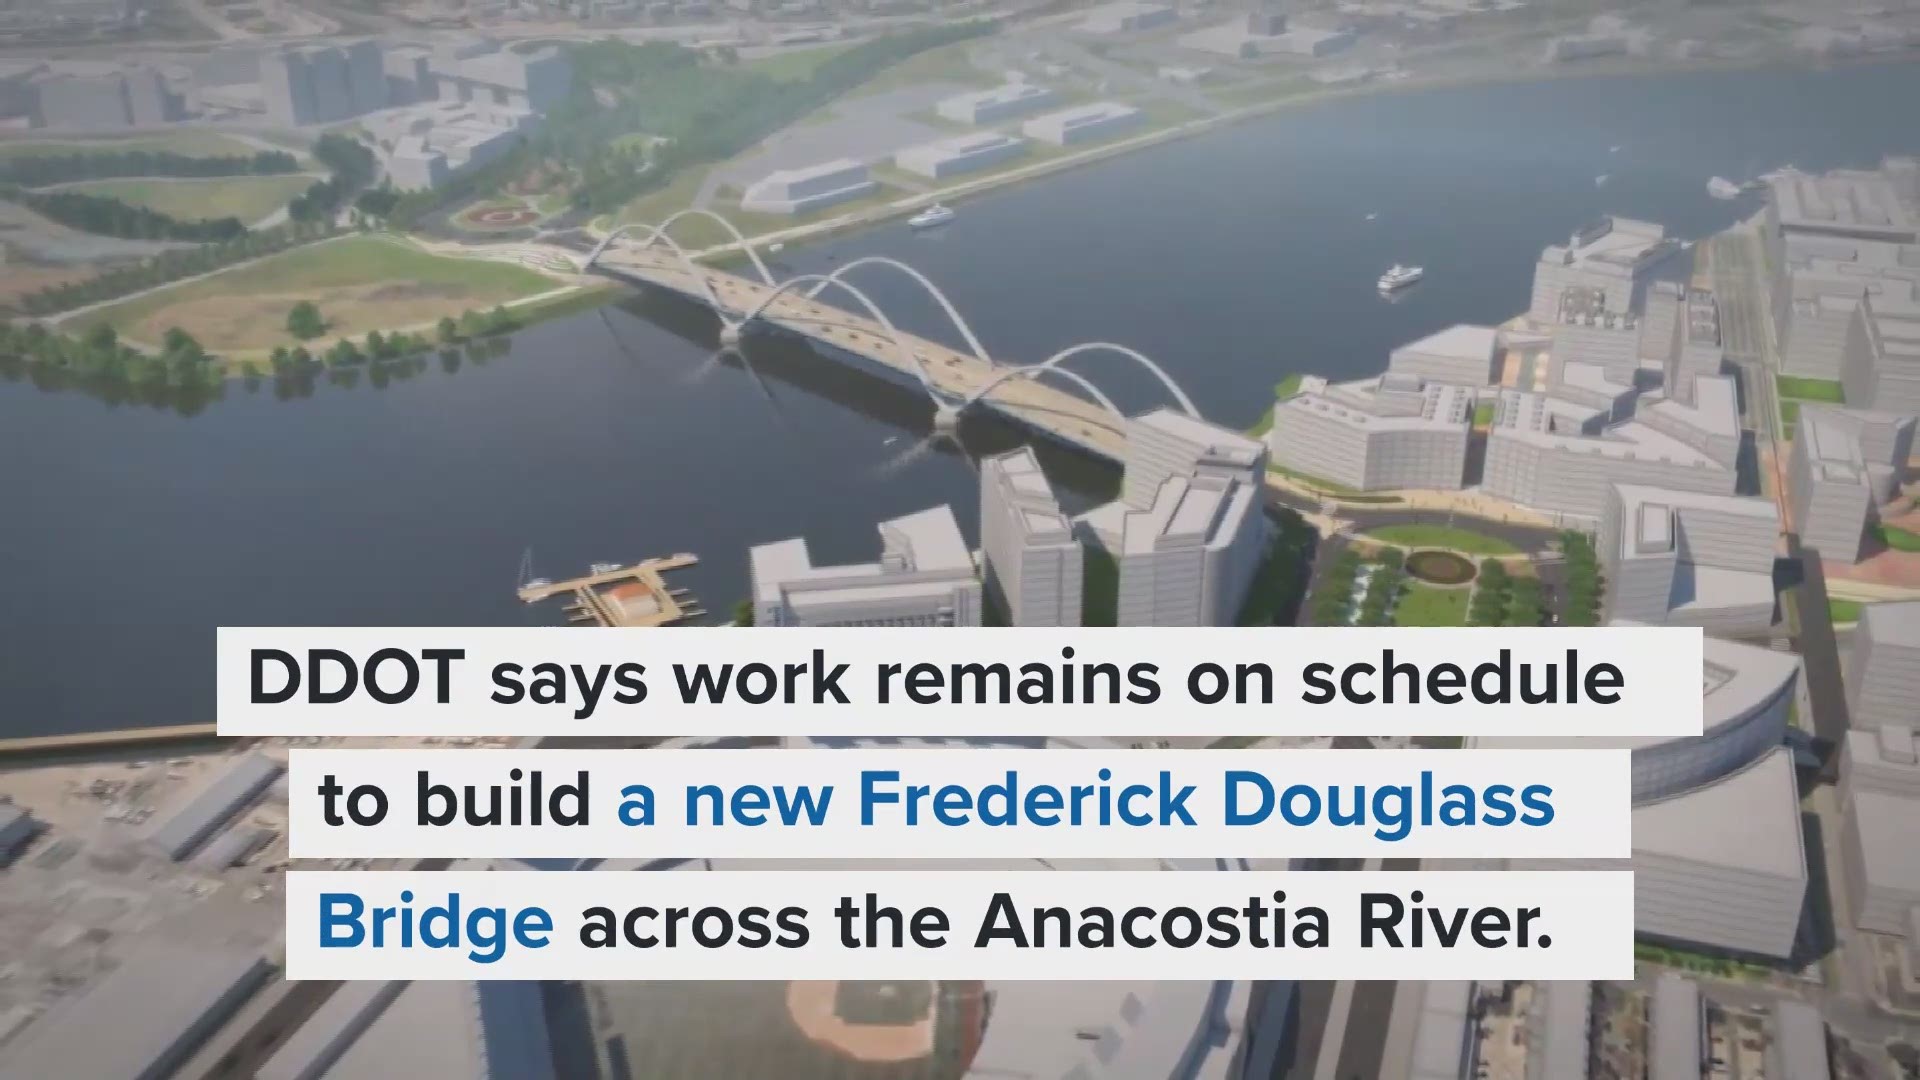 The city says the project will be the largest public infrastructure in history of DDOT.